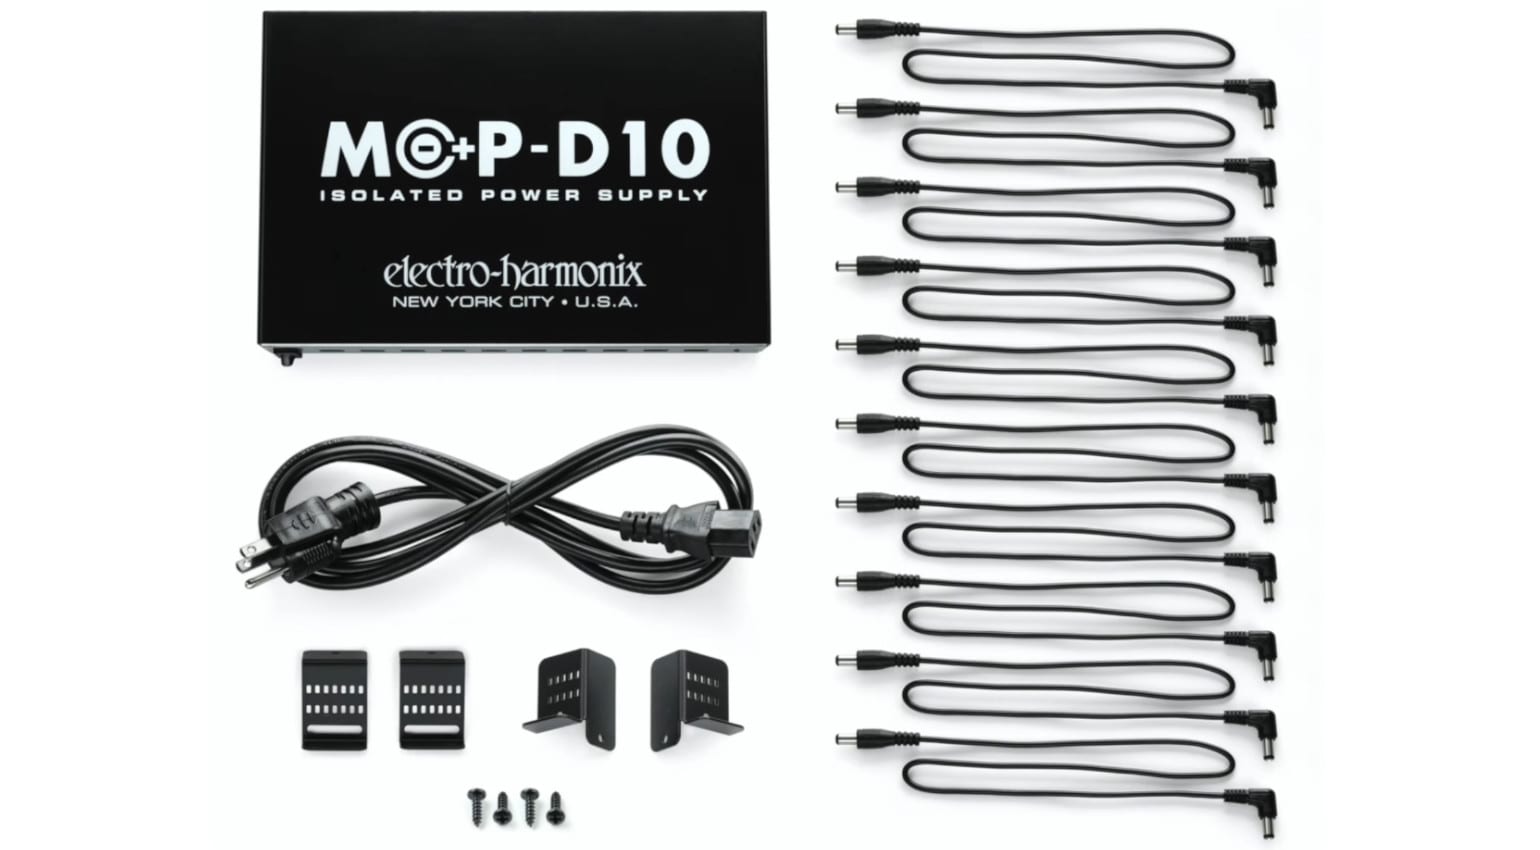 Electro-Harmonix MOP-D10 power supply and cables